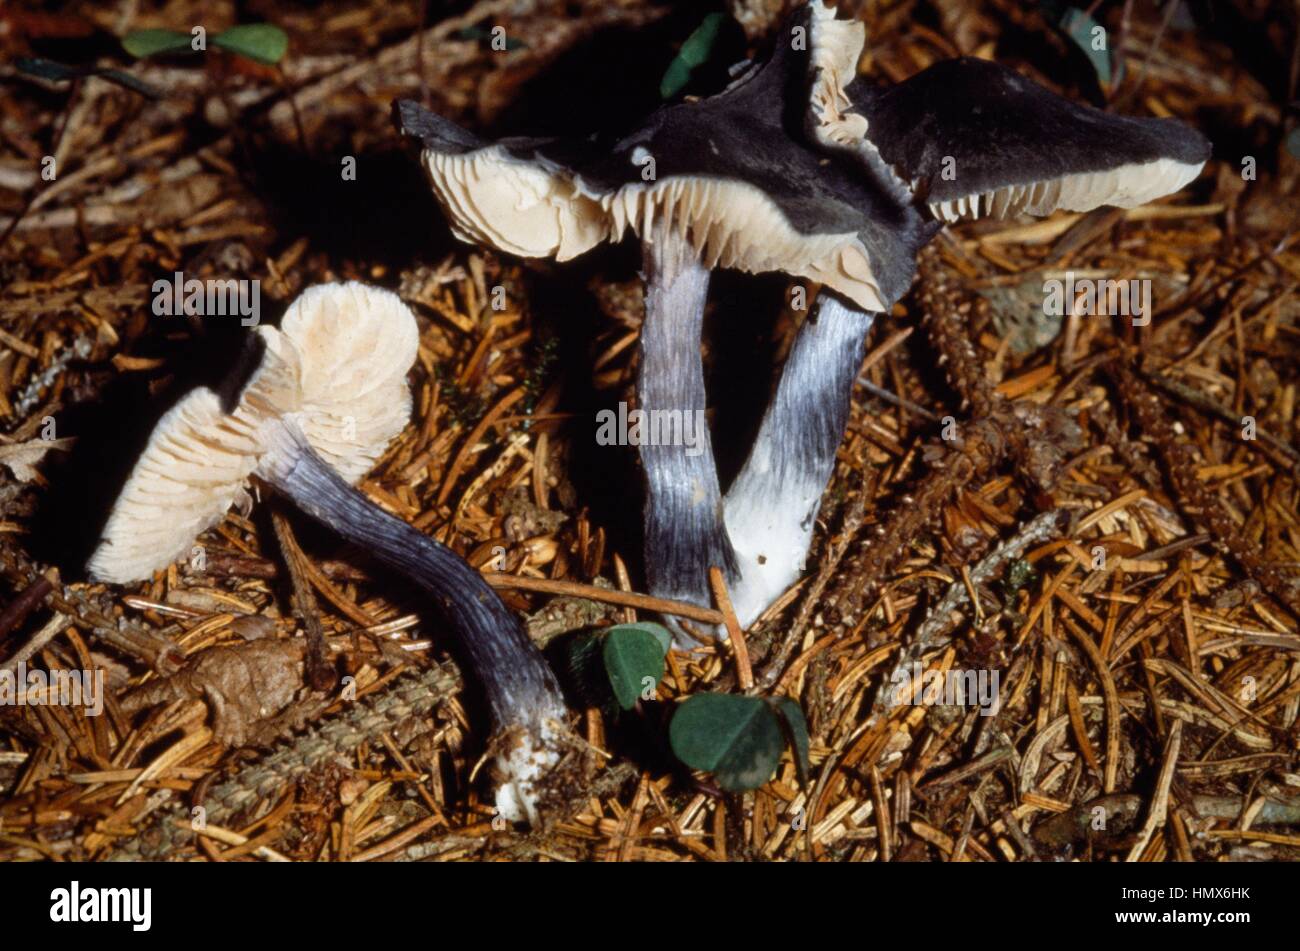 Entoloma nitidum fungus with the colours of the cap and stem contrasted with the lamellars. Stock Photo